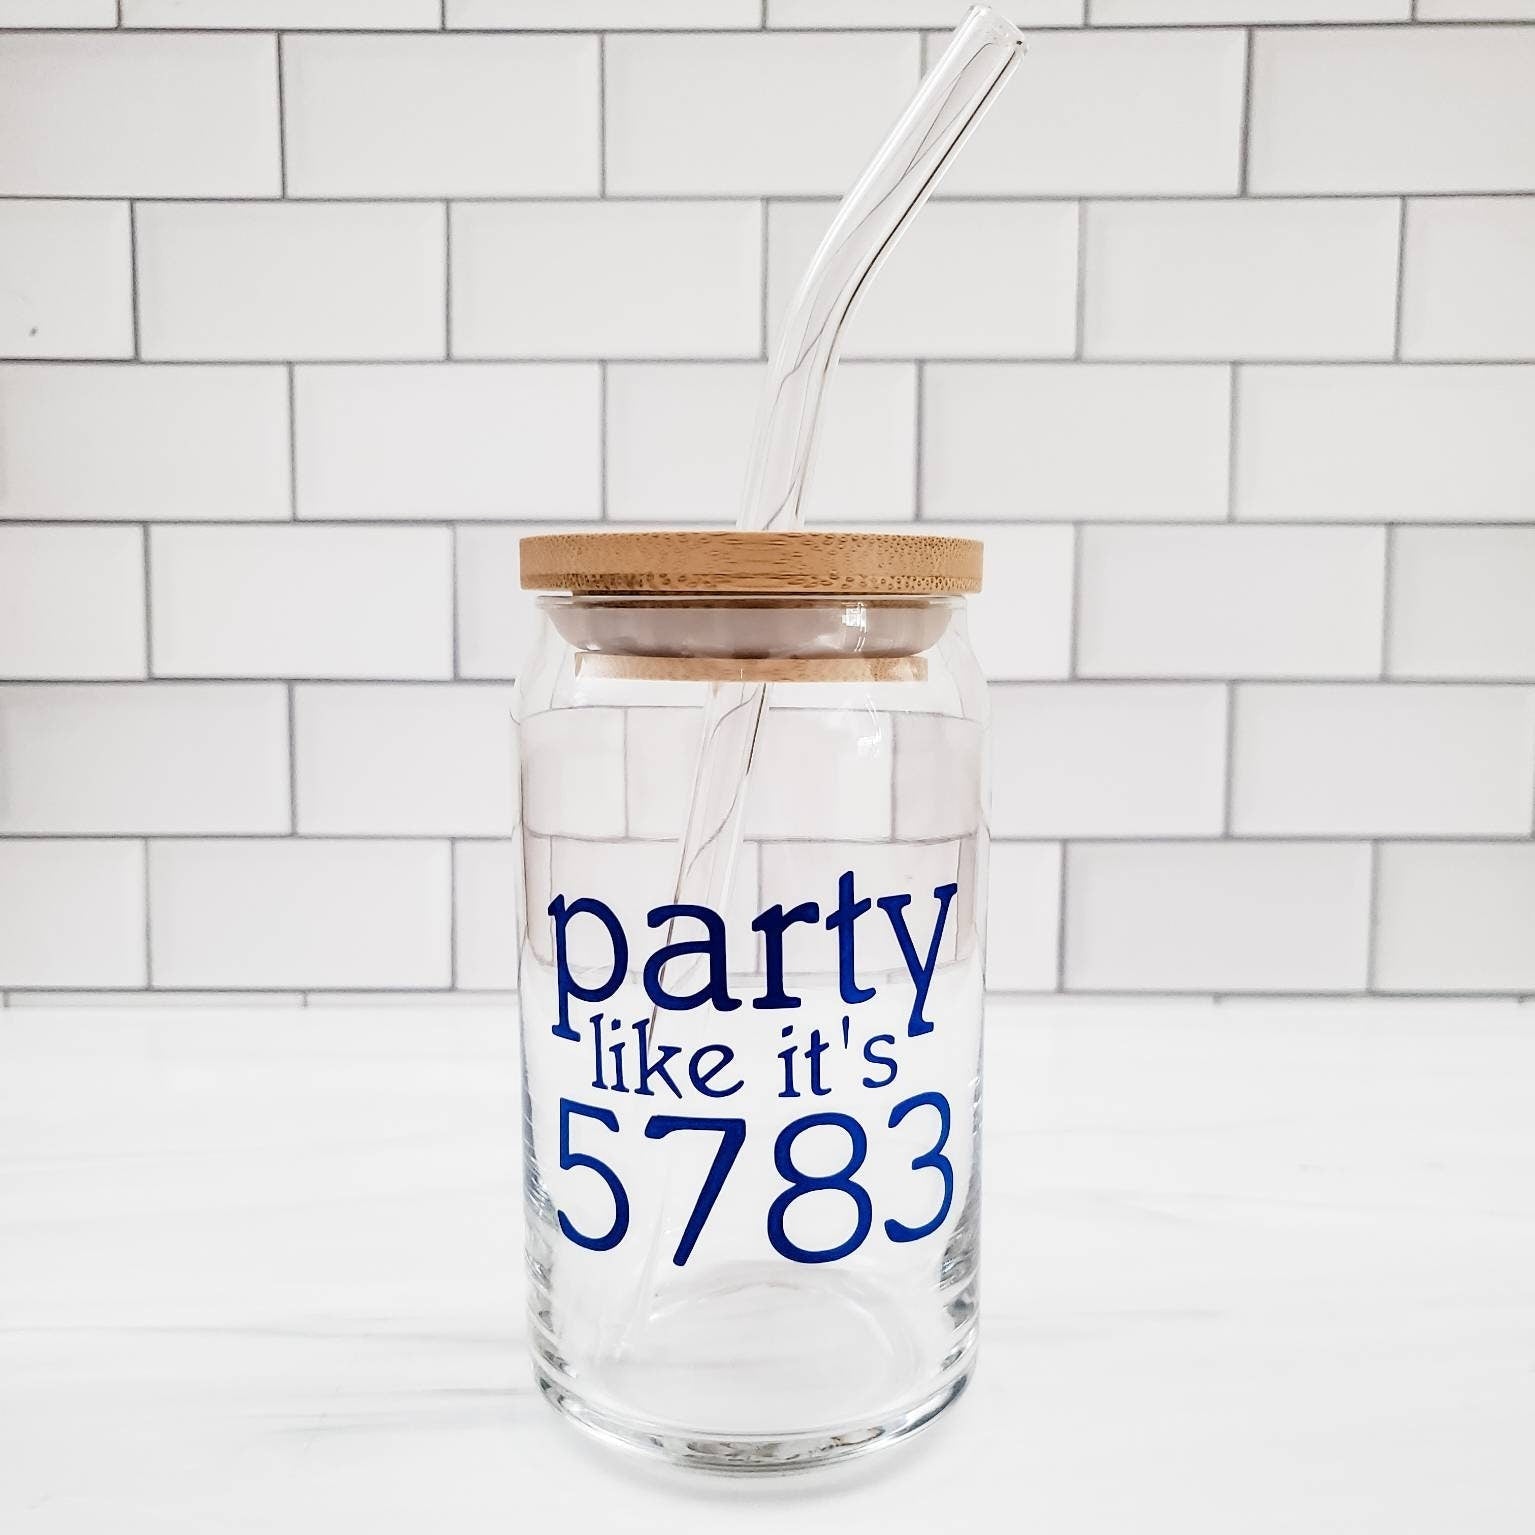 PARTY LIKE IT'S 5783 Snowglobe Glass Drink Tumbler Salt and Sparkle